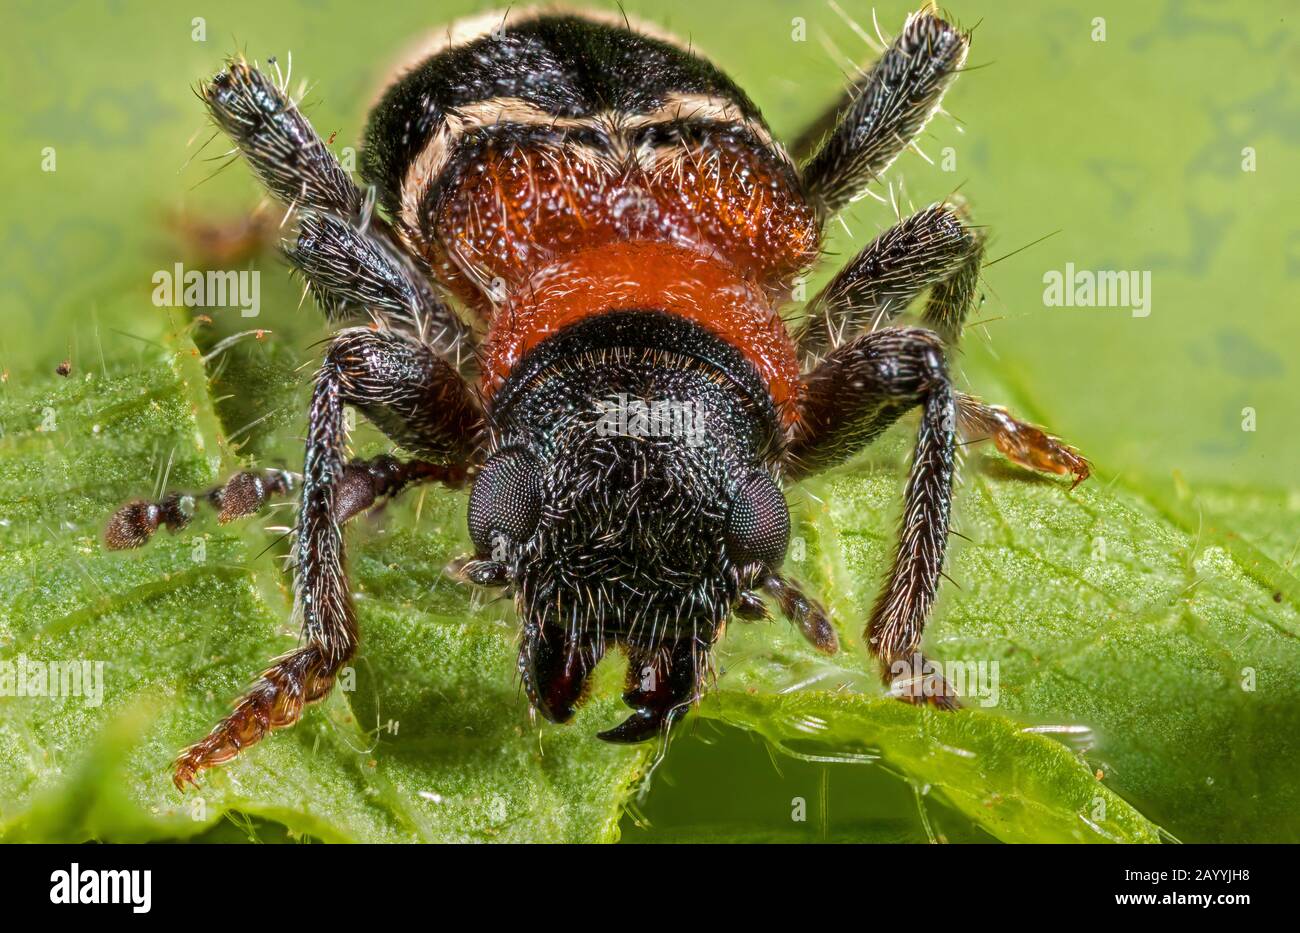 Ant beetle, European Red-bellied Clerid (Thanasimus formicarius), sitting on a leaf, front view, Germany Stock Photo